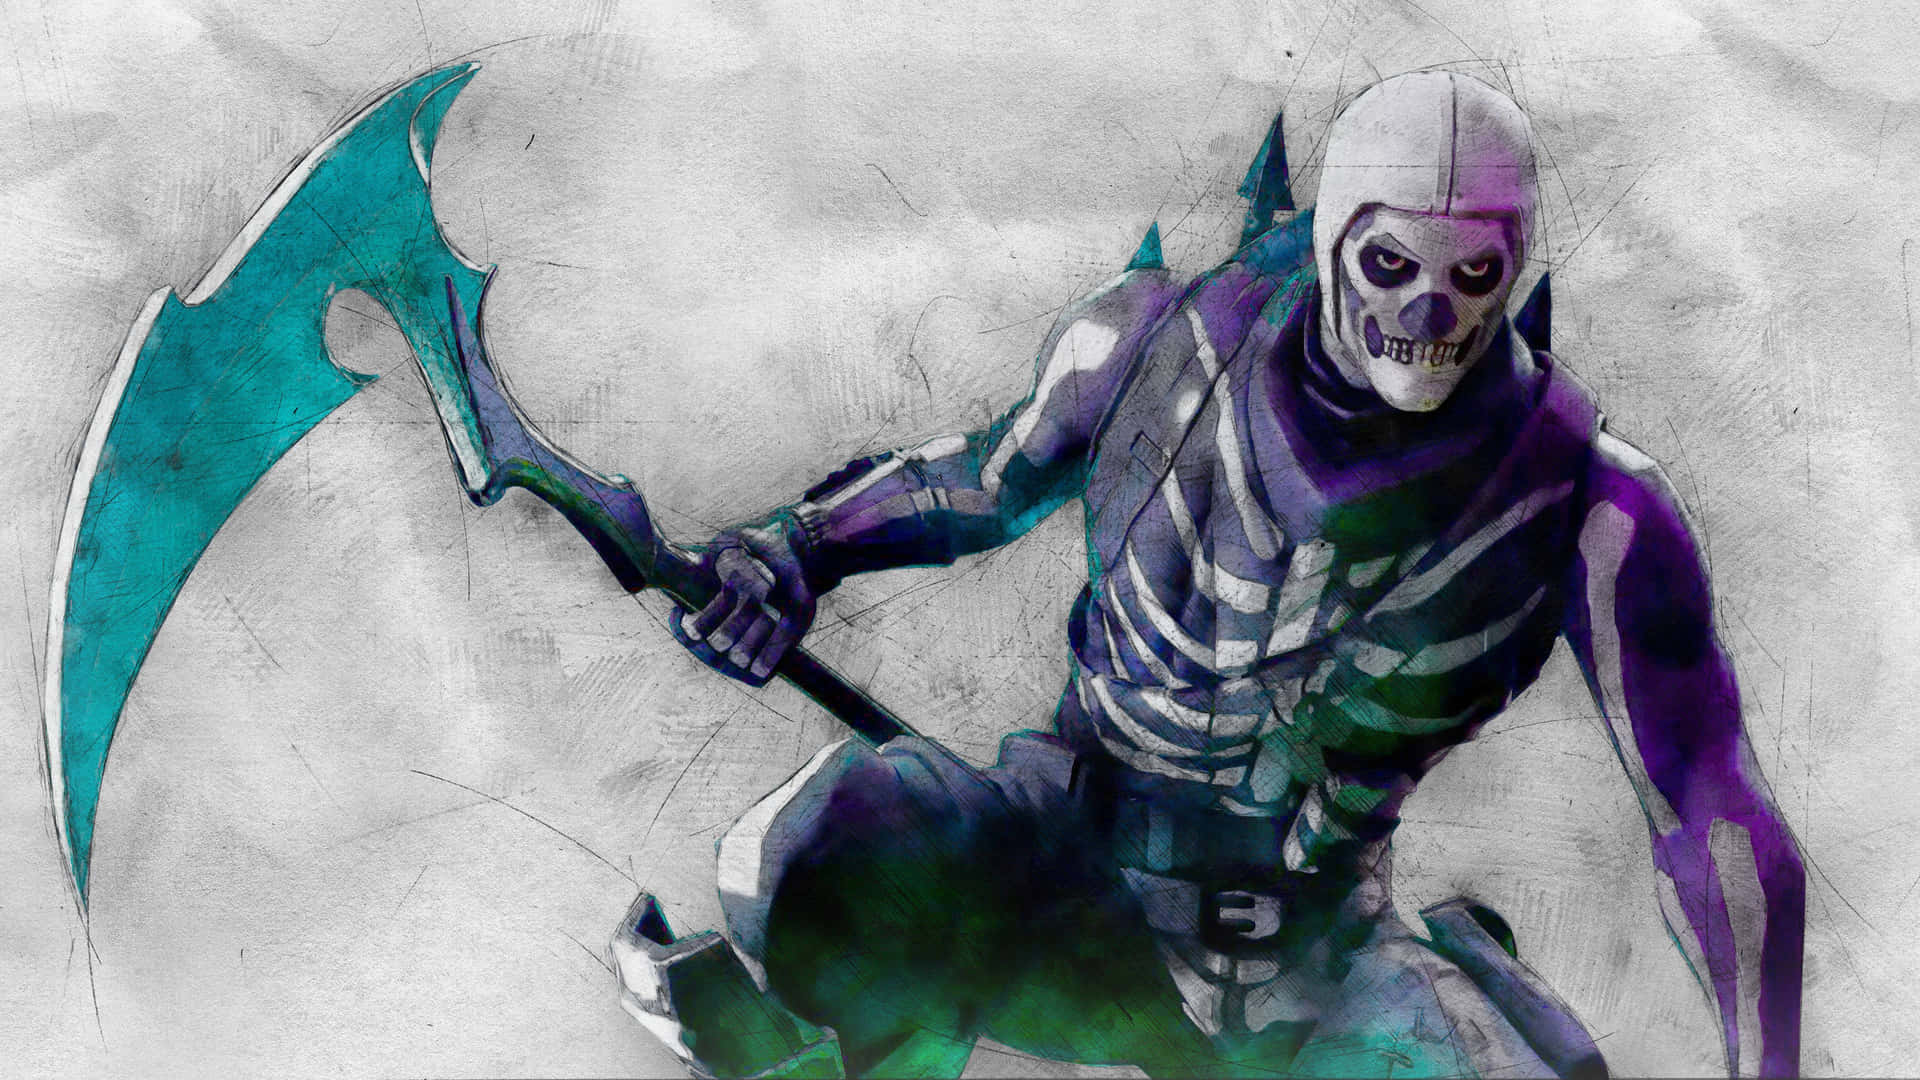 Double the skulls, double the fright! Wallpaper